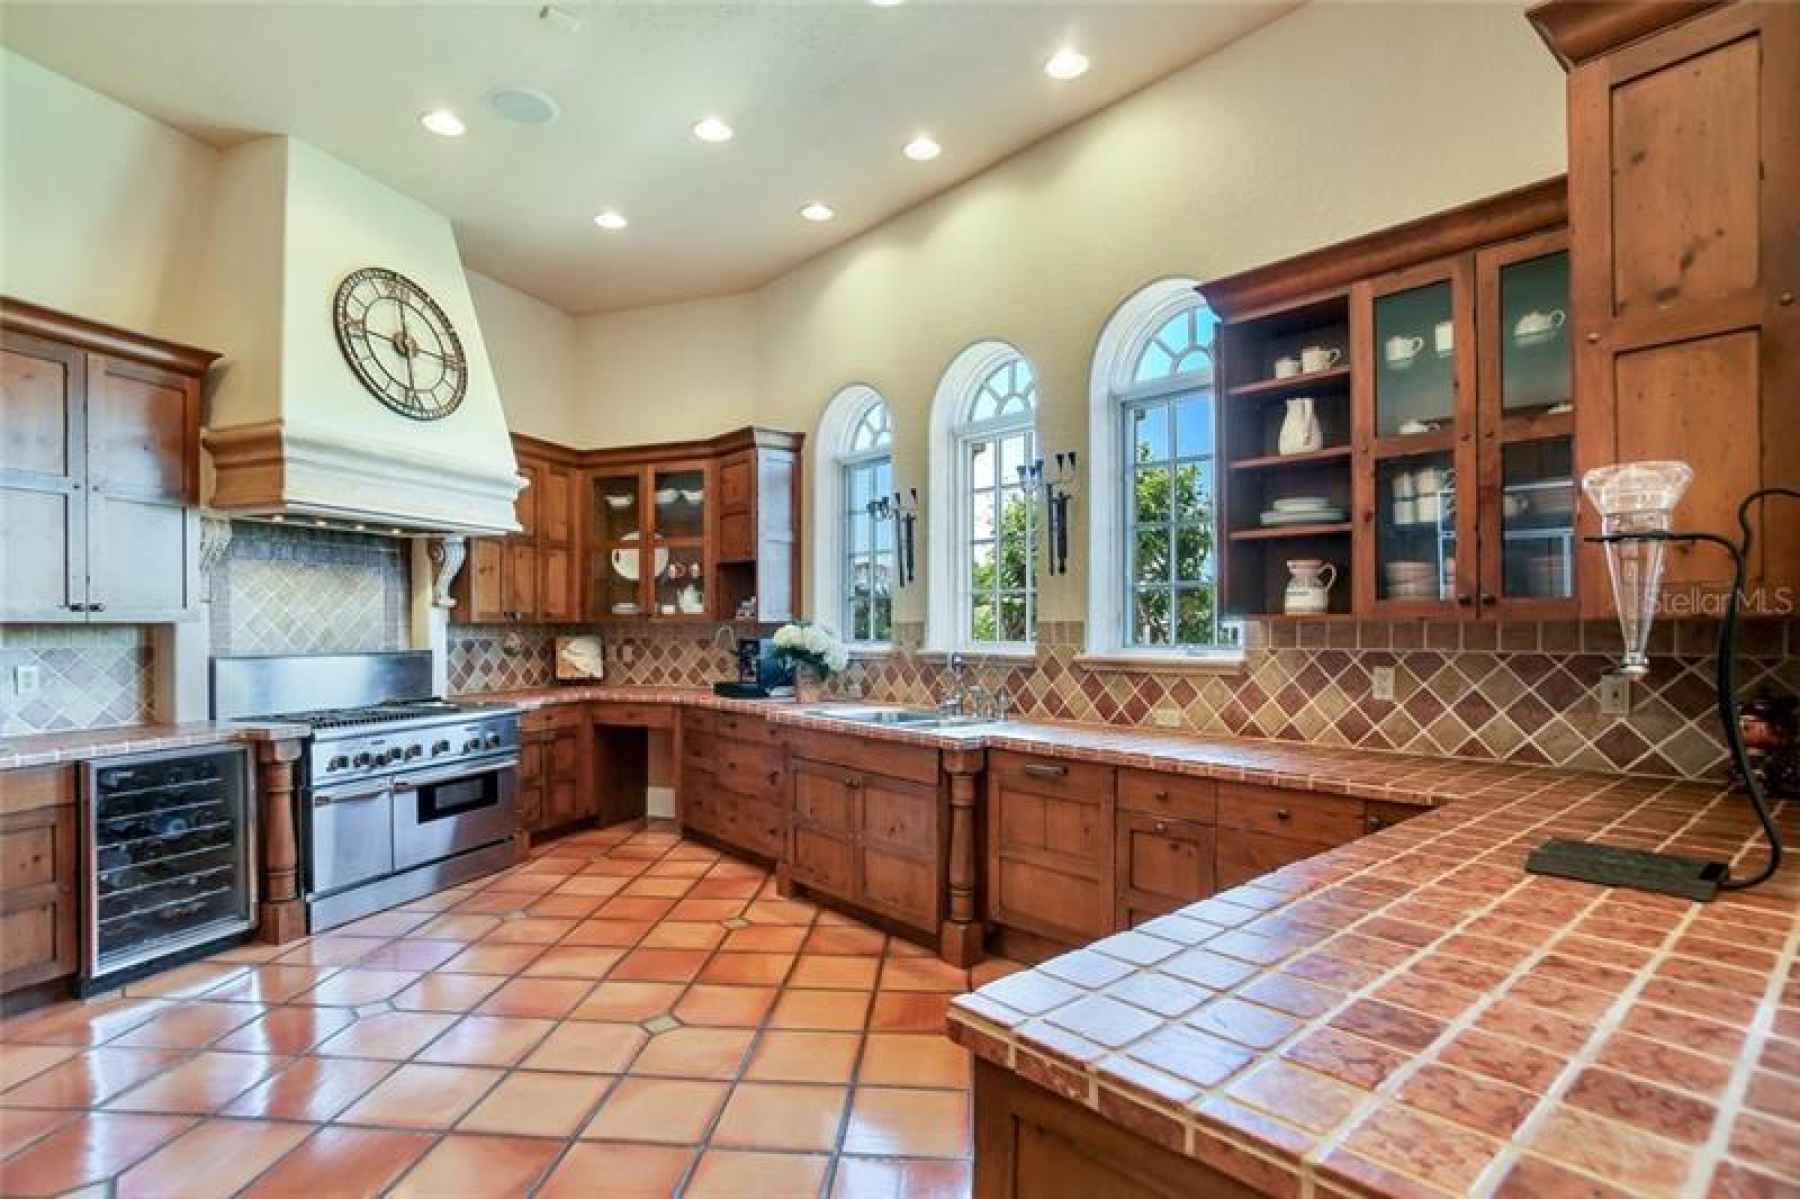 Kitchen with wine refrigerator and lots of display space